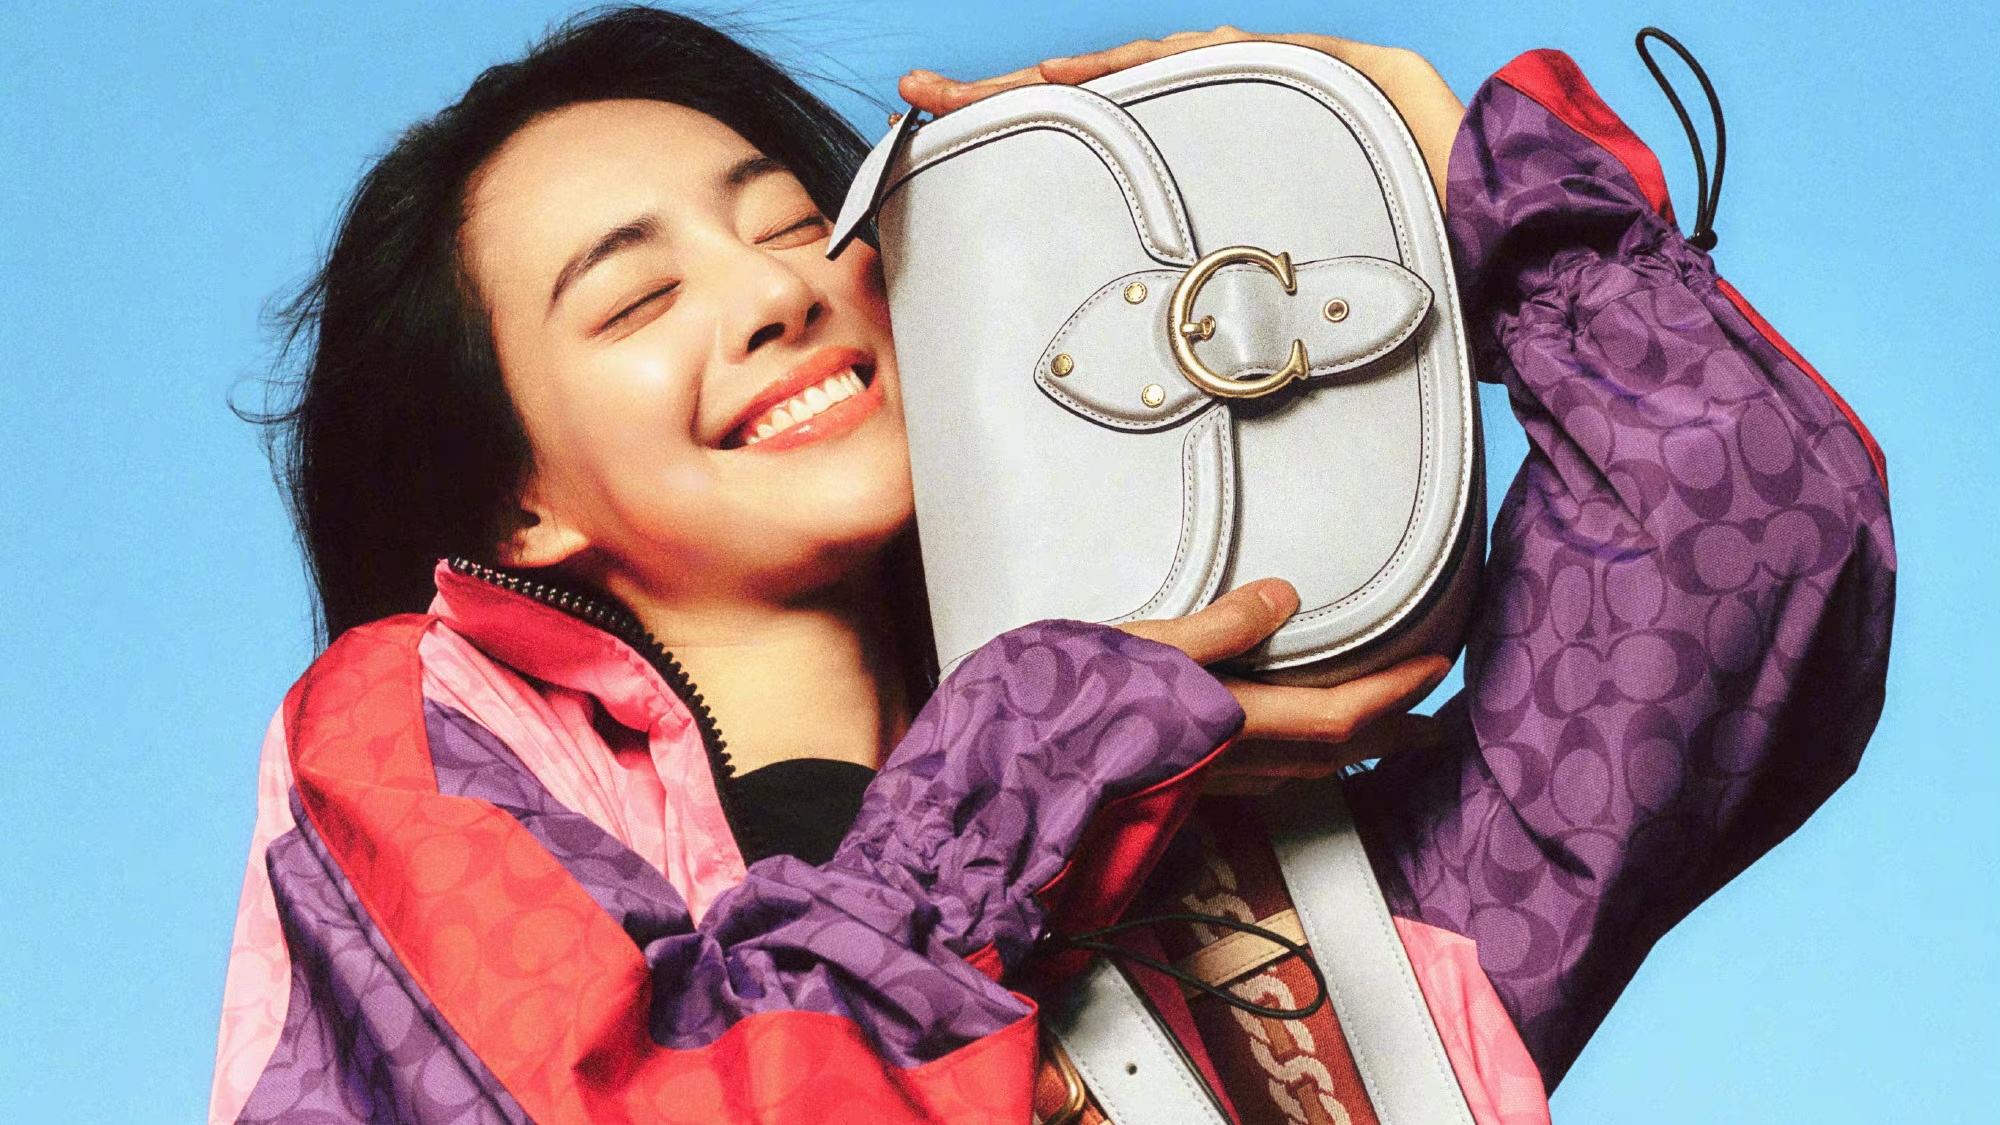 Coach has plans to raise prices in China as much as 20 percent. Will the move boost the handbag maker’s allure or alienate loyal customers? Photo: Coach